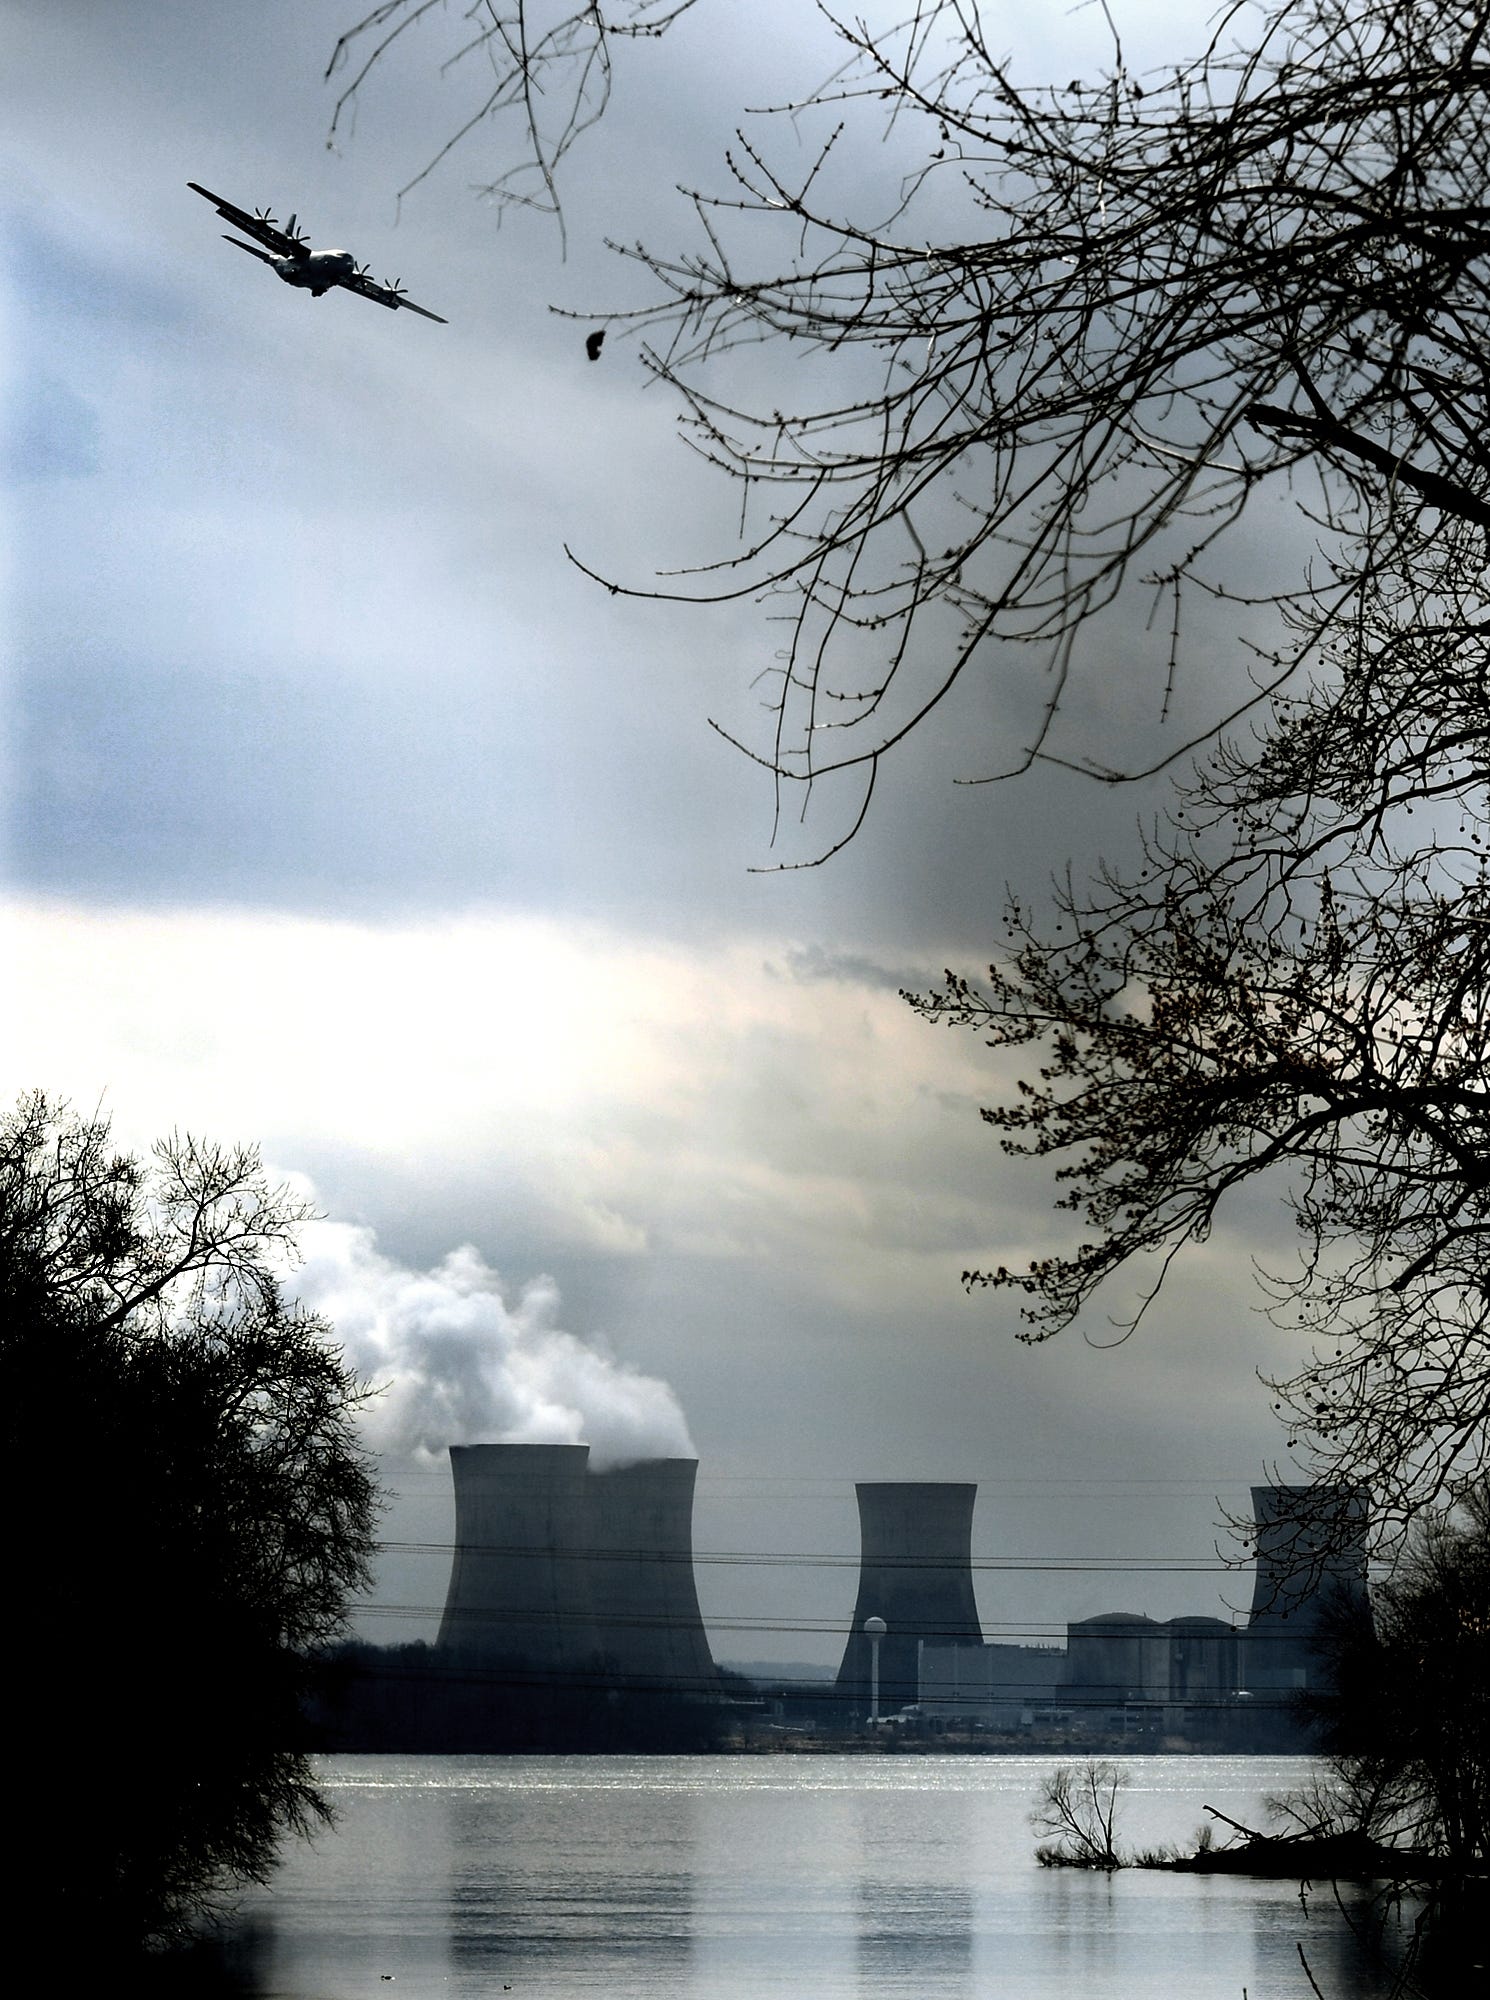 A military aircraft flies near the Three Mile Island Nuclear Generating Station viewed from the borough of Royalton, Dauphin County, Friday, March 15, 2019. The plant's Unit 2 reactors have been shut down since the March 28,1979, partial meltdown. Bill Kalina photo